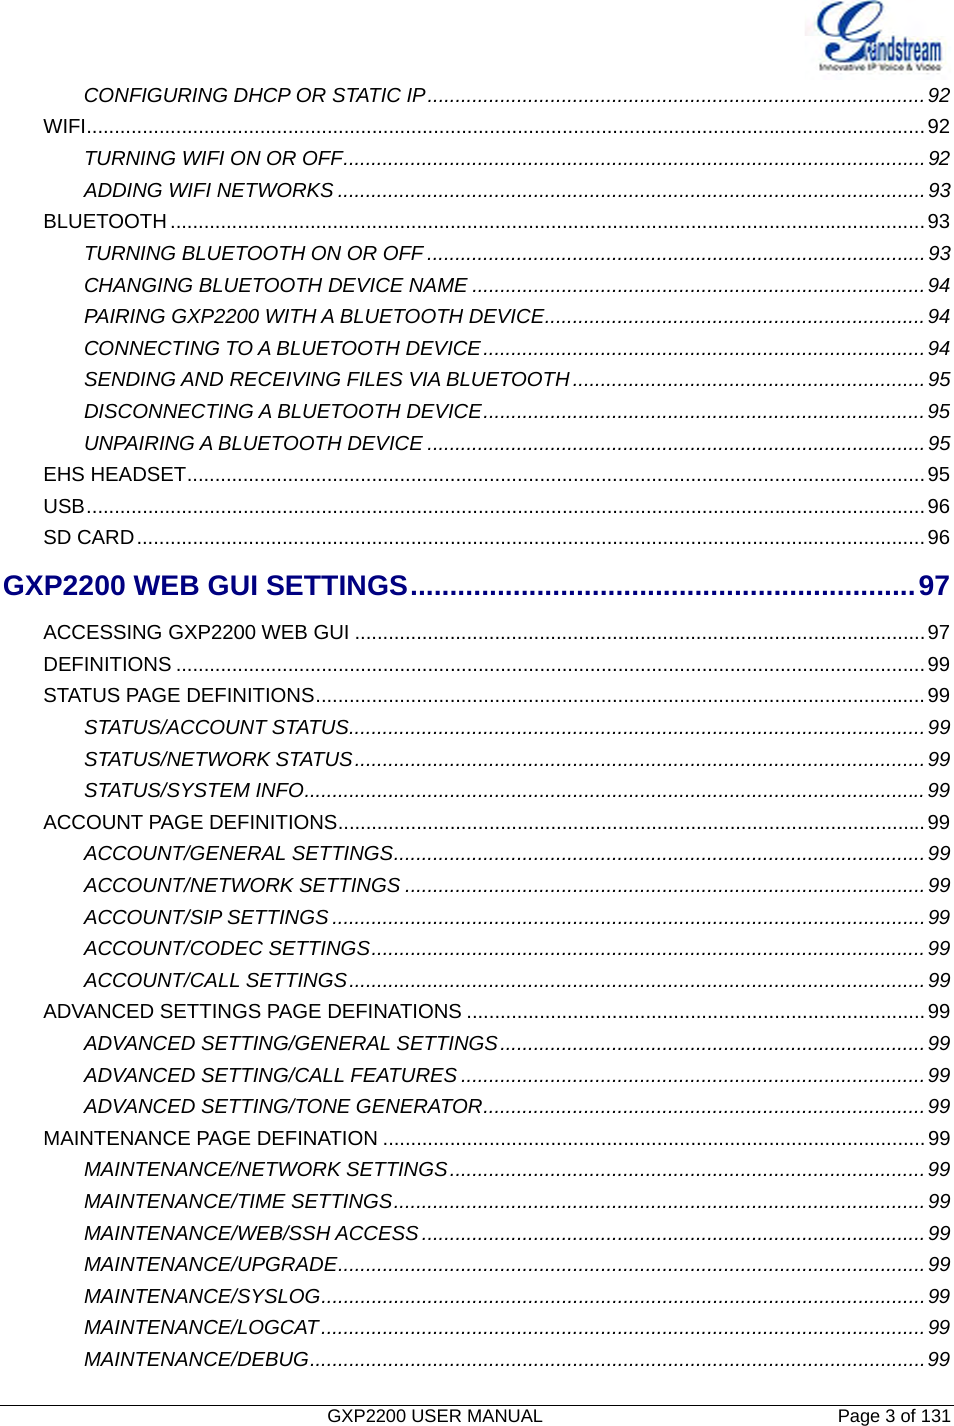   GXP2200 USER MANUAL       Page 3 of 131                                  CONFIGURING DHCP OR STATIC IP.........................................................................................92WIFI......................................................................................................................................................92TURNING WIFI ON OR OFF........................................................................................................92ADDING WIFI NETWORKS .........................................................................................................93BLUETOOTH .......................................................................................................................................93TURNING BLUETOOTH ON OR OFF .........................................................................................93CHANGING BLUETOOTH DEVICE NAME .................................................................................94PAIRING GXP2200 WITH A BLUETOOTH DEVICE....................................................................94CONNECTING TO A BLUETOOTH DEVICE...............................................................................94SENDING AND RECEIVING FILES VIA BLUETOOTH ...............................................................95DISCONNECTING A BLUETOOTH DEVICE...............................................................................95UNPAIRING A BLUETOOTH DEVICE .........................................................................................95EHS HEADSET....................................................................................................................................95USB......................................................................................................................................................96SD CARD.............................................................................................................................................96GXP2200 WEB GUI SETTINGS................................................................97ACCESSING GXP2200 WEB GUI ......................................................................................................97DEFINITIONS ......................................................................................................................................99STATUS PAGE DEFINITIONS.............................................................................................................99STATUS/ACCOUNT STATUS.......................................................................................................99STATUS/NETWORK STATUS......................................................................................................99STATUS/SYSTEM INFO...............................................................................................................99ACCOUNT PAGE DEFINITIONS.........................................................................................................99ACCOUNT/GENERAL SETTINGS...............................................................................................99ACCOUNT/NETWORK SETTINGS .............................................................................................99ACCOUNT/SIP SETTINGS ..........................................................................................................99ACCOUNT/CODEC SETTINGS...................................................................................................99ACCOUNT/CALL SETTINGS.......................................................................................................99ADVANCED SETTINGS PAGE DEFINATIONS ..................................................................................99ADVANCED SETTING/GENERAL SETTINGS............................................................................99ADVANCED SETTING/CALL FEATURES ...................................................................................99ADVANCED SETTING/TONE GENERATOR...............................................................................99MAINTENANCE PAGE DEFINATION .................................................................................................99MAINTENANCE/NETWORK SETTINGS.....................................................................................99MAINTENANCE/TIME SETTINGS...............................................................................................99MAINTENANCE/WEB/SSH ACCESS..........................................................................................99MAINTENANCE/UPGRADE.........................................................................................................99MAINTENANCE/SYSLOG............................................................................................................99MAINTENANCE/LOGCAT............................................................................................................99MAINTENANCE/DEBUG..............................................................................................................99